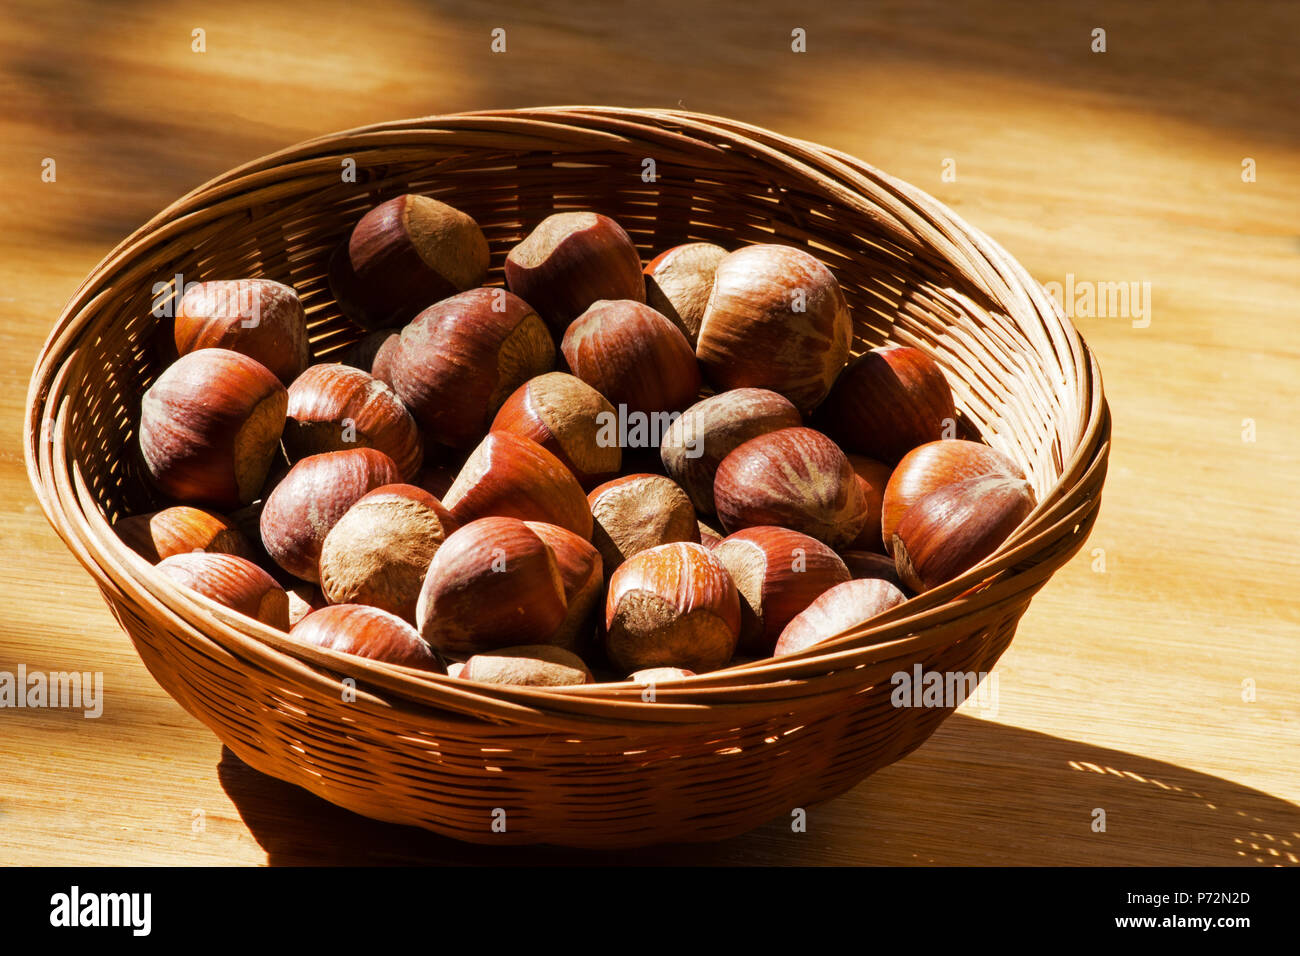 Hazelnuts in a basket on a wooden table Stock Photo